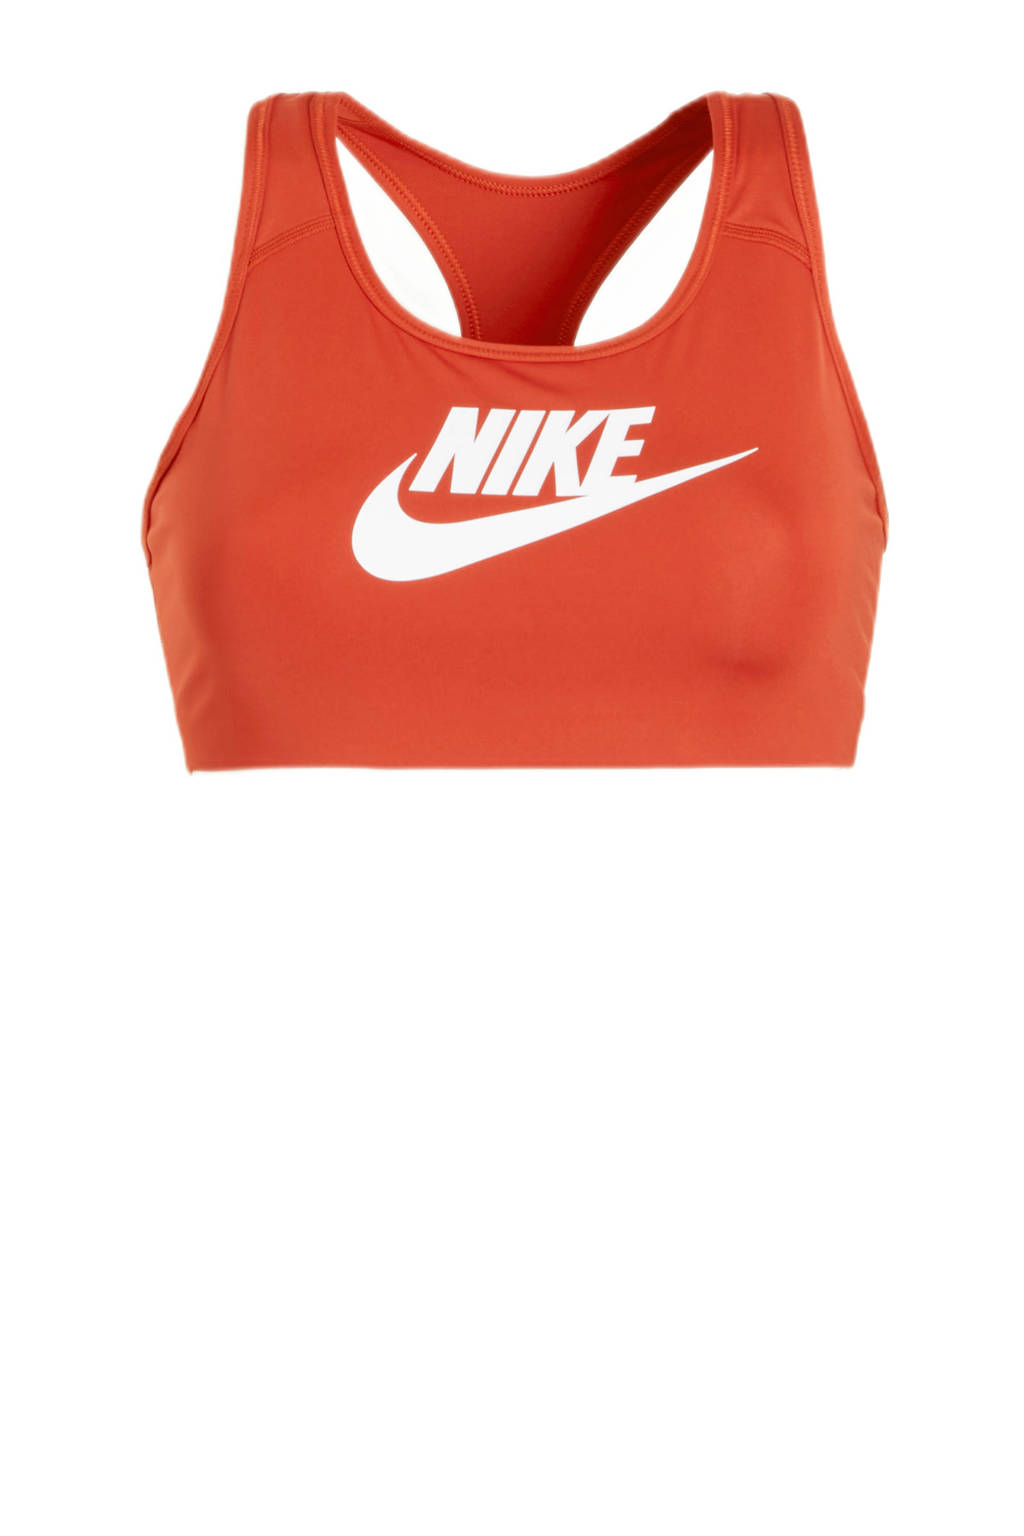 Nike level 2 sportbh rood/wit